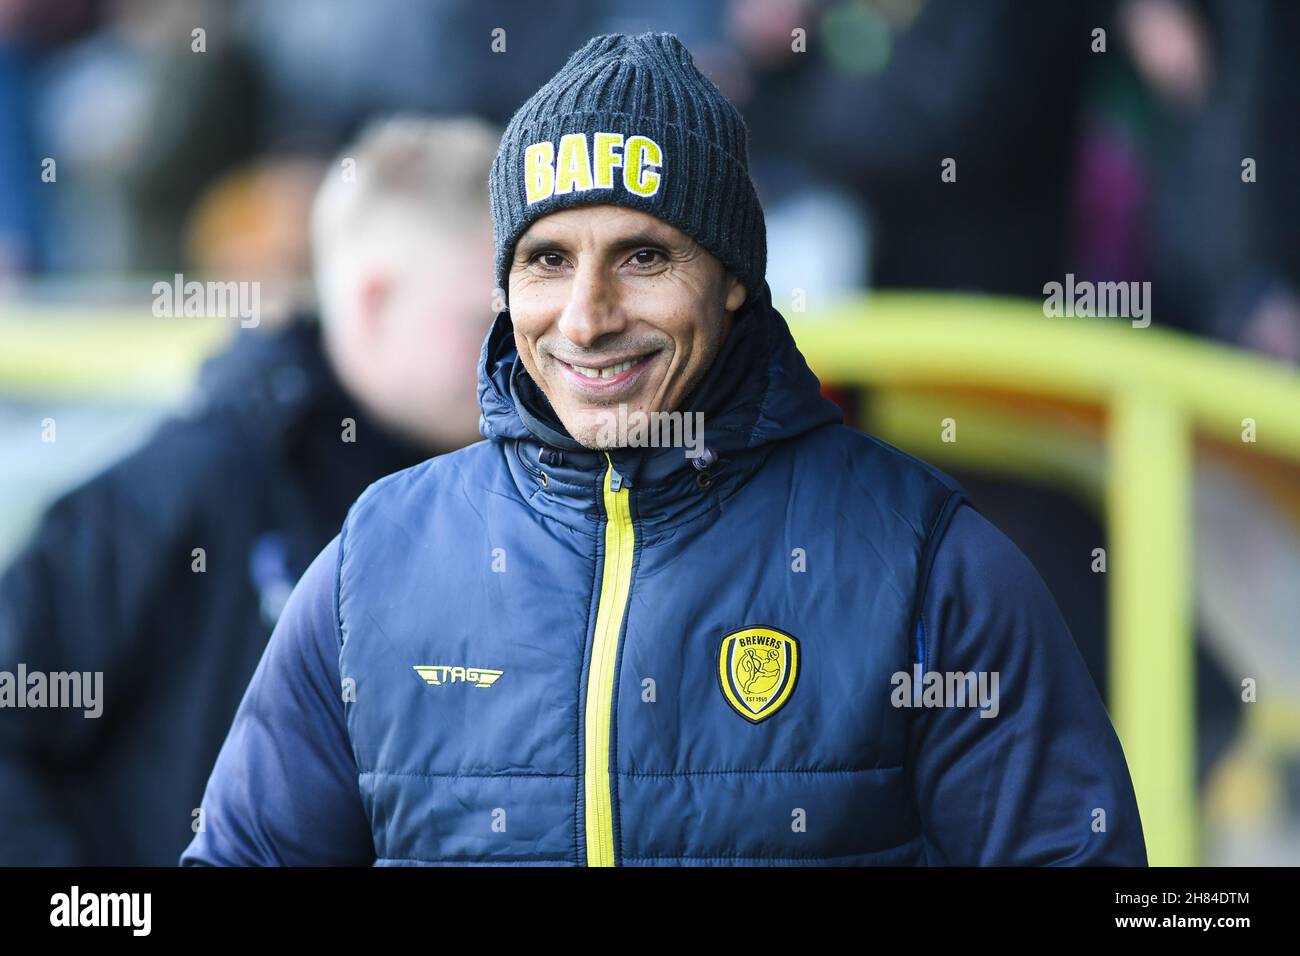 Burton Upon Trent, UK. 27th Nov, 2021. Assistant Manager of burton Albion  Dino Maamria before kick off in Burton upon Trent, United Kingdom on  11/27/2021. (Photo by Oli Adams/News Images/Sipa USA) Credit: